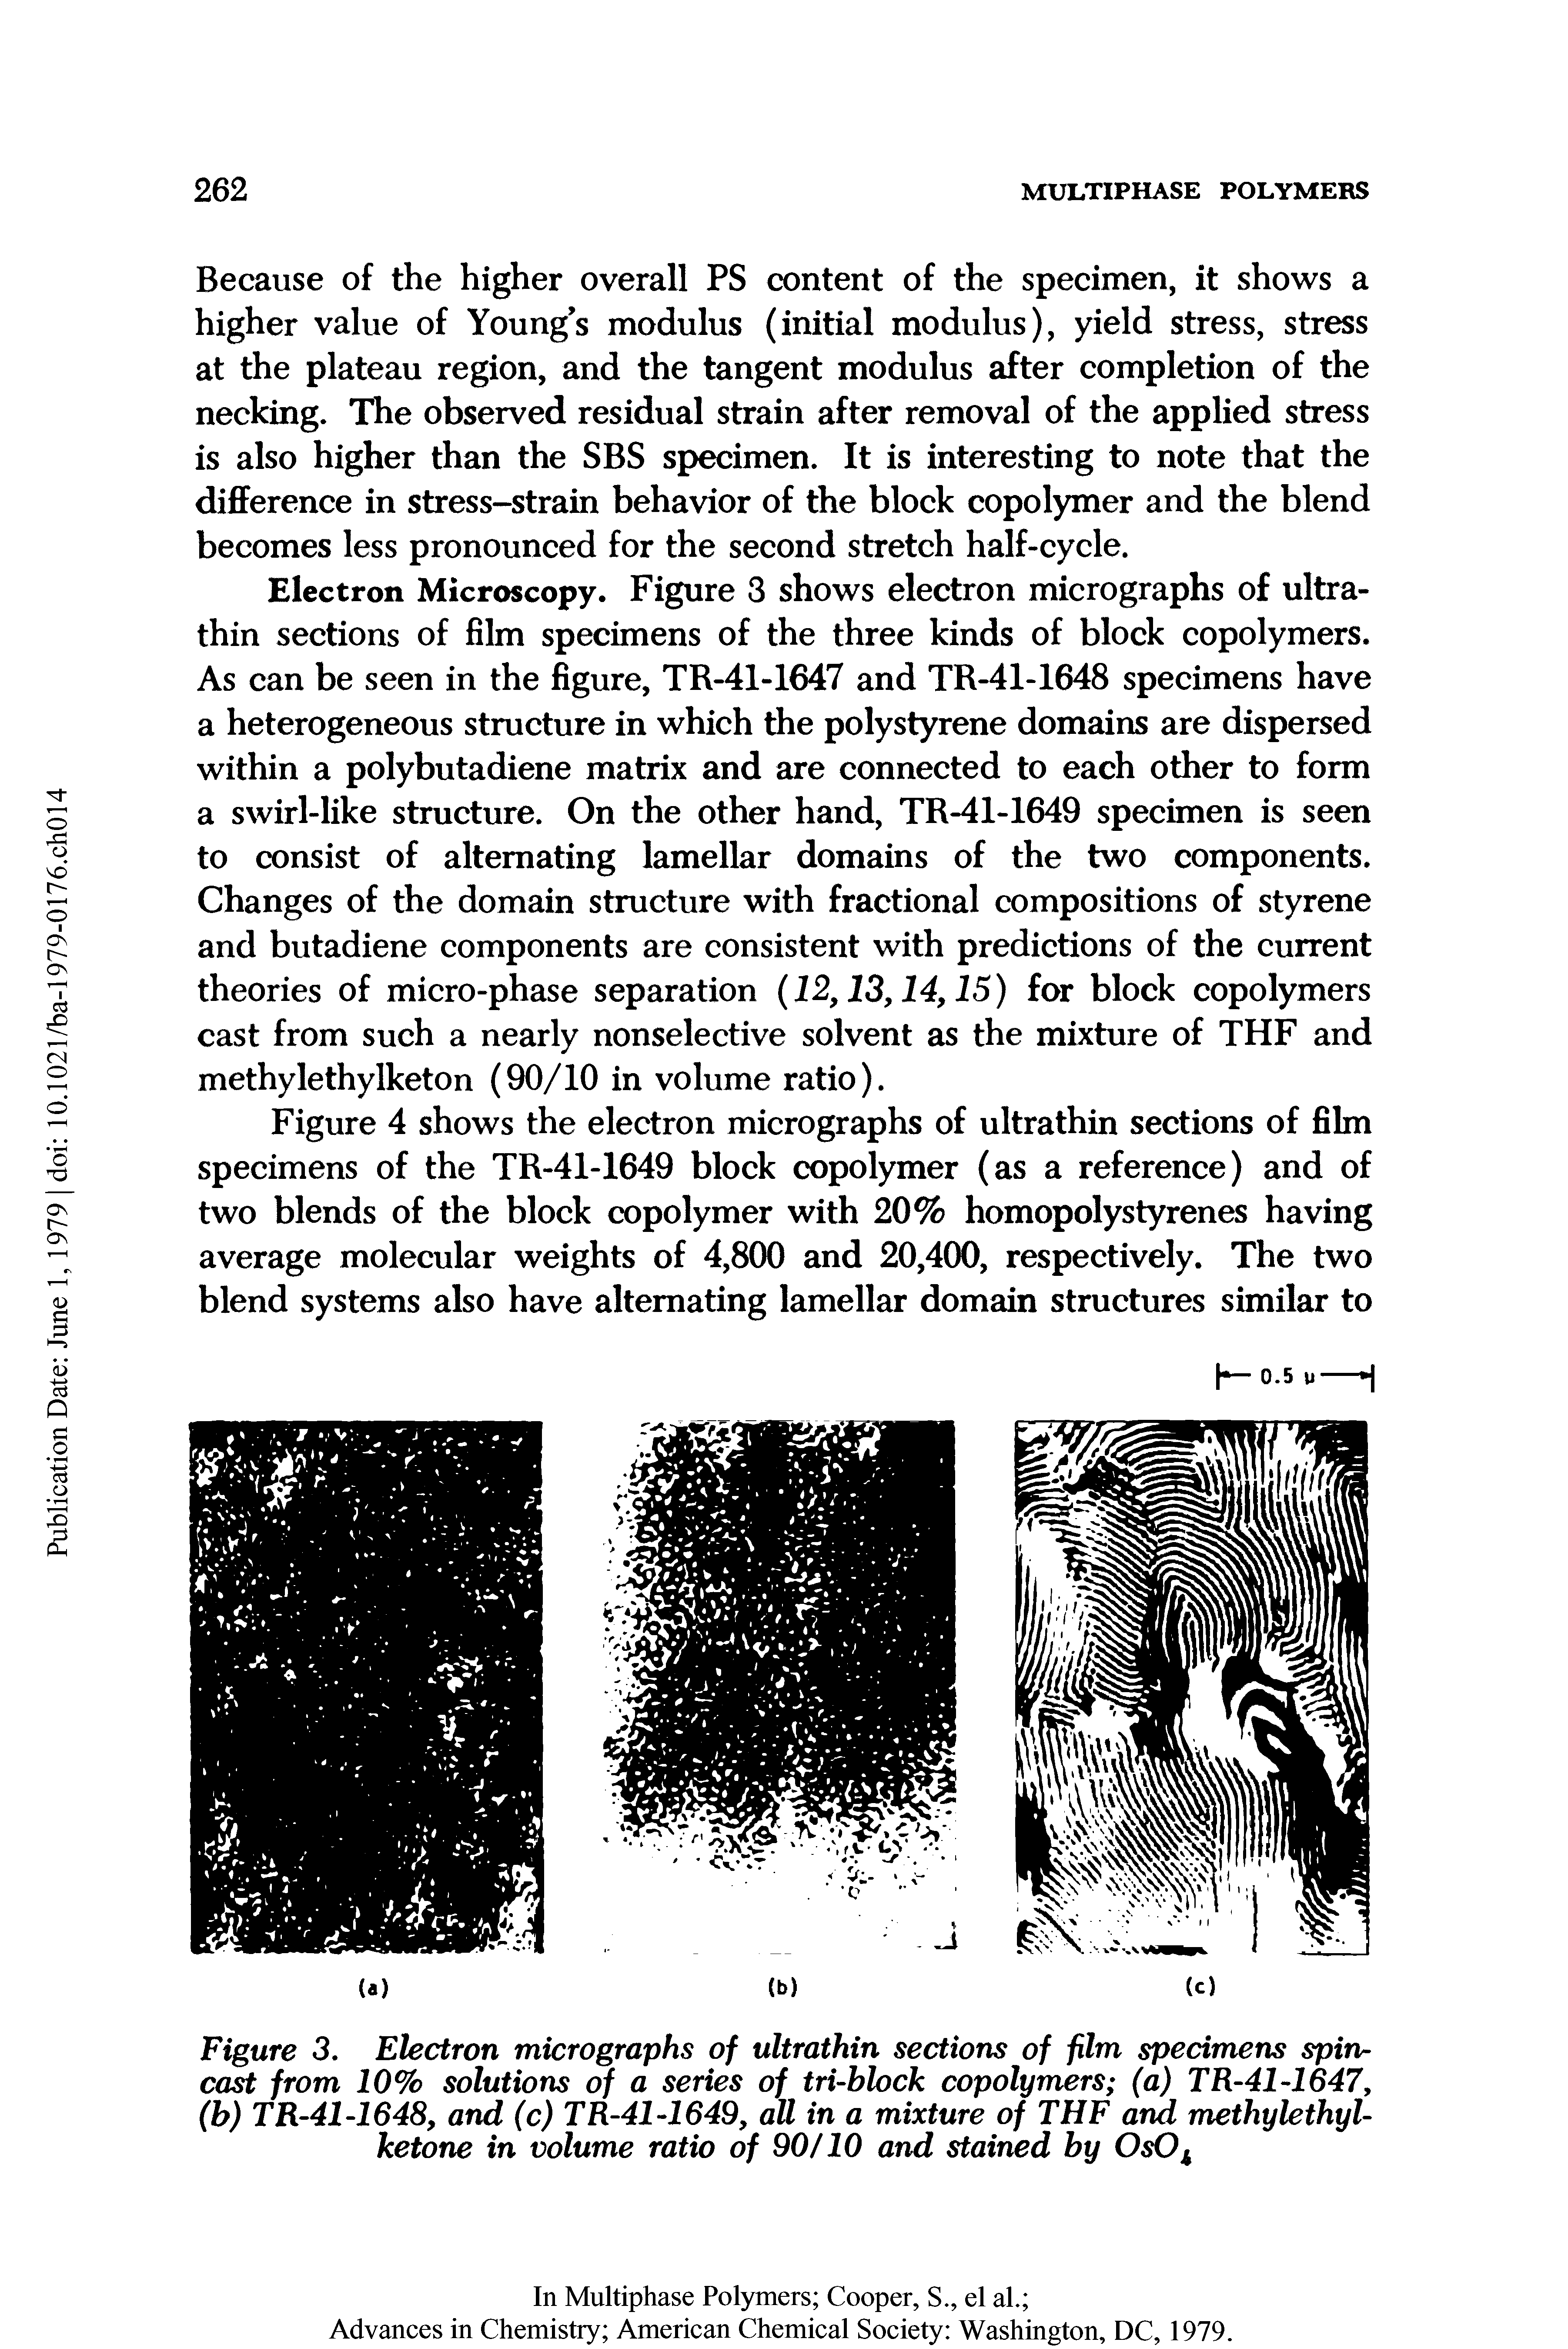 Figure 3. Electron micrographs of ultrathin sections of film specimens spin-cast from 10% solutions of a series of tri-block copolymers (a) TR-41-1647, (b) TR-41-1648, and (c) TR-41-1649, all in a mixture of THF and methylethyl-ketone in volume ratio of 90/10 and stained by OsOA...